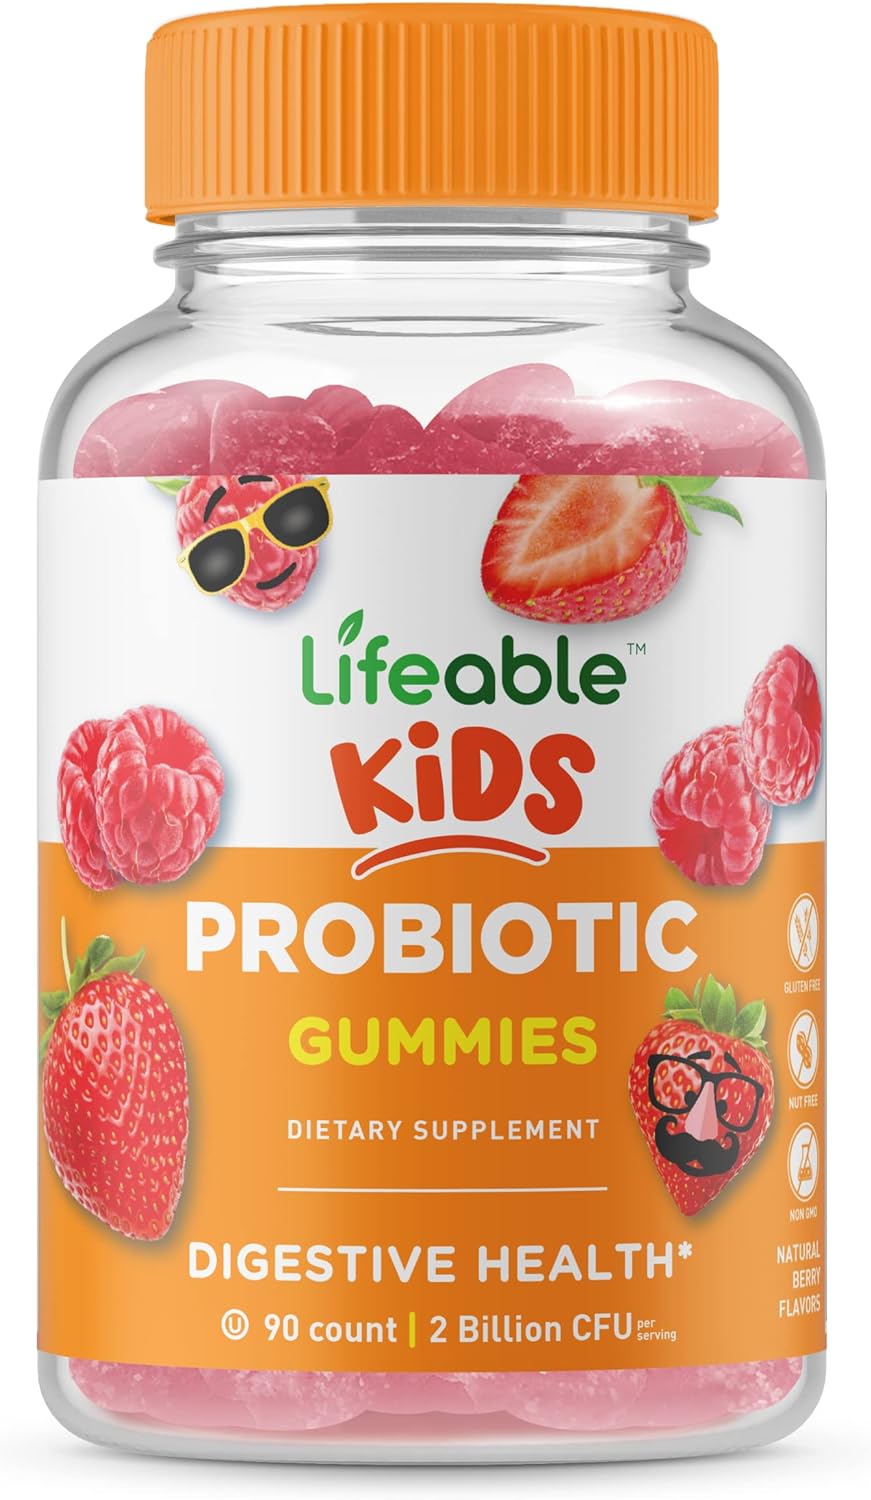 Lifeable Probiotics for Kids - 2 Billion CFU - Great Tasting Natural Flavor Gummy - Gluten Free Vegetarian GMO-Free Probiotic - for Gut Health, Digestive Support and Immune Support - 90 Gummies